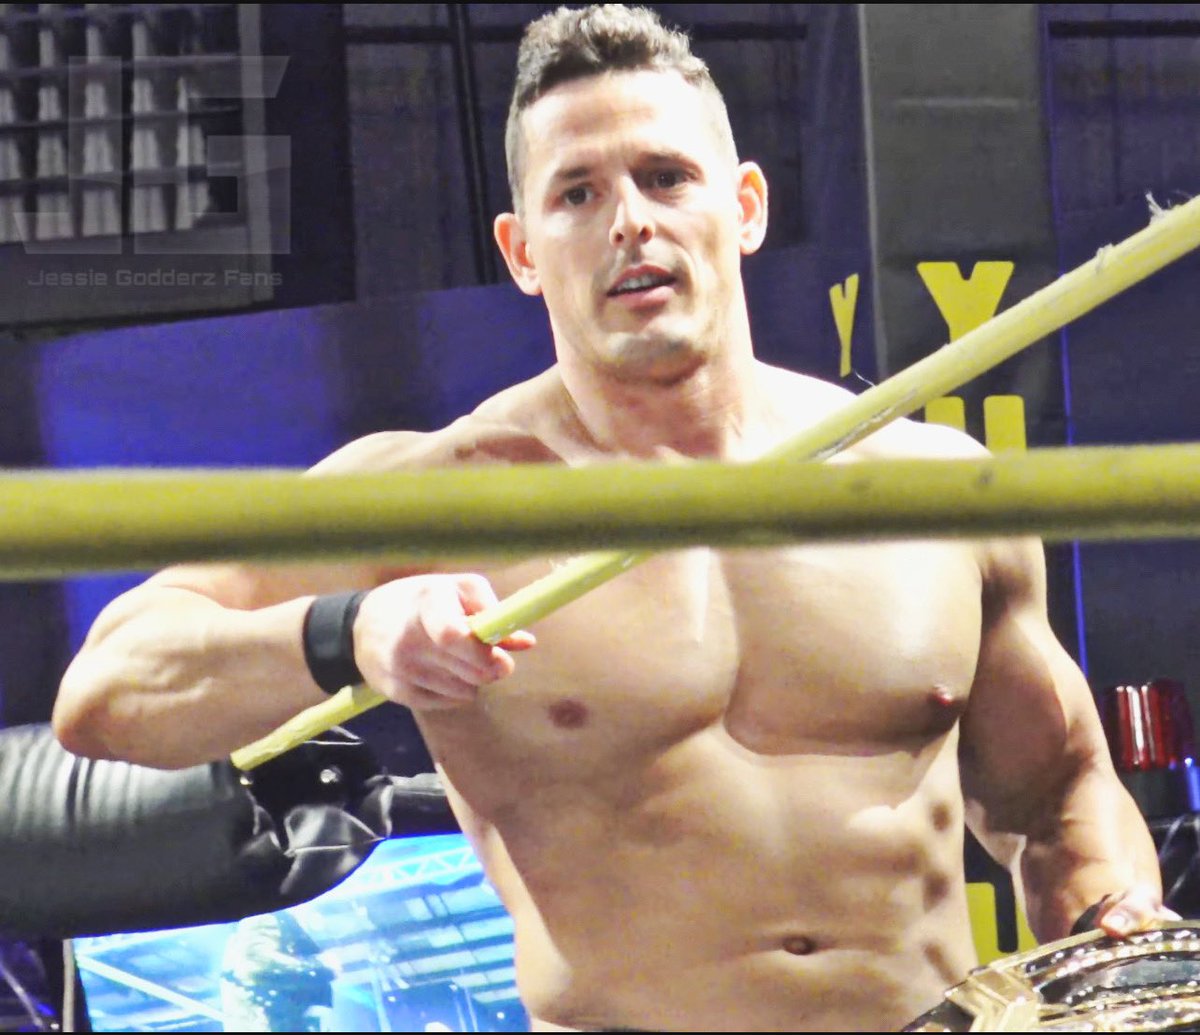 #BestWrestlerAlive THEE Face of The Faction! THEE Face of @ovwrestling! None can compare to @MrPEC_Tacular Jessie Godderz! 
.
#ovw #wwe #aew #wwe2k23